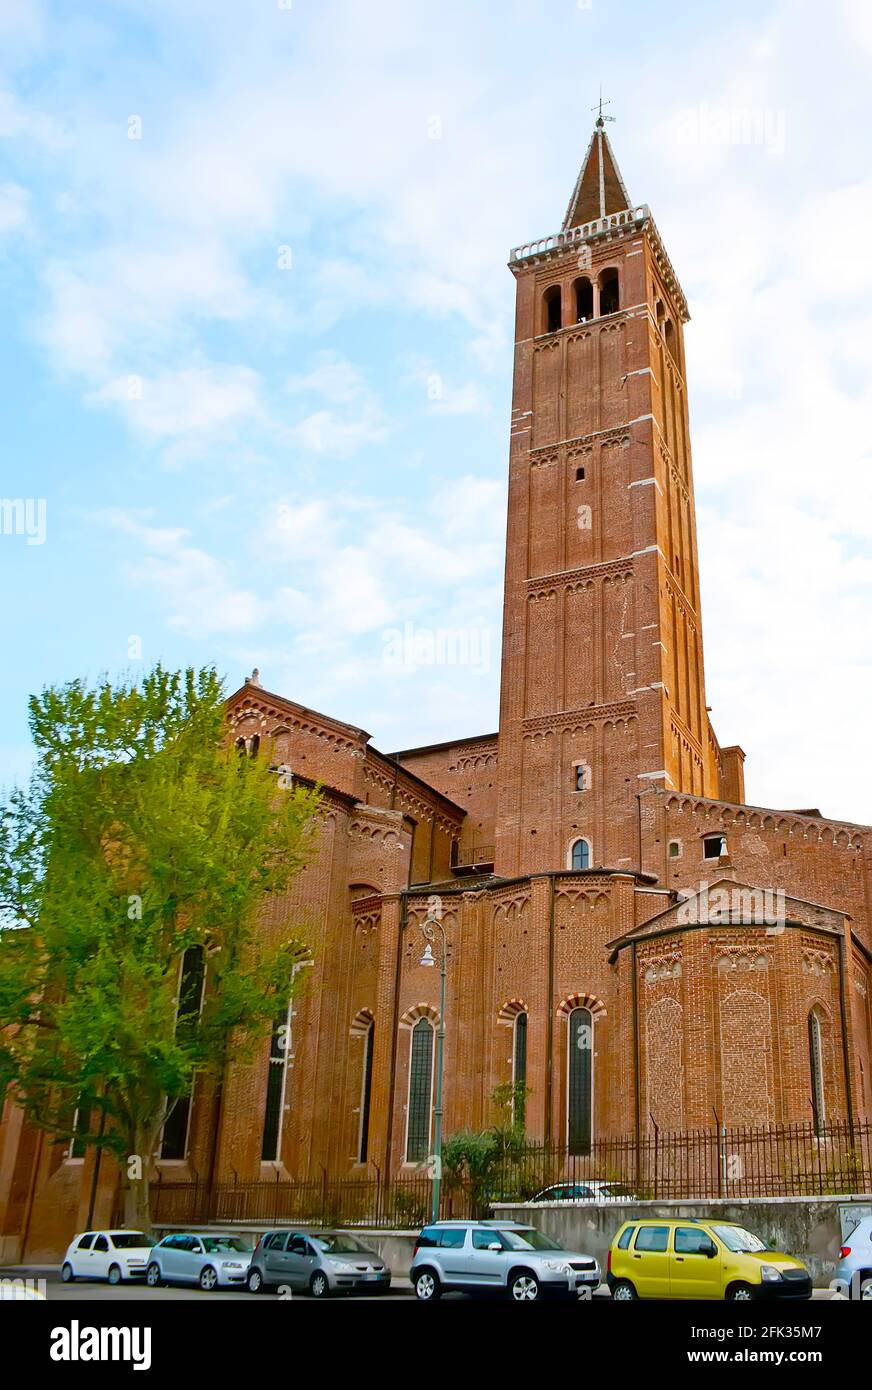 The brick building of the medieval Gothic Santa Anastasia Basilica with tall bell tower, view from the Piazza Bra Molinari square, Verona, Italy Stock Photo